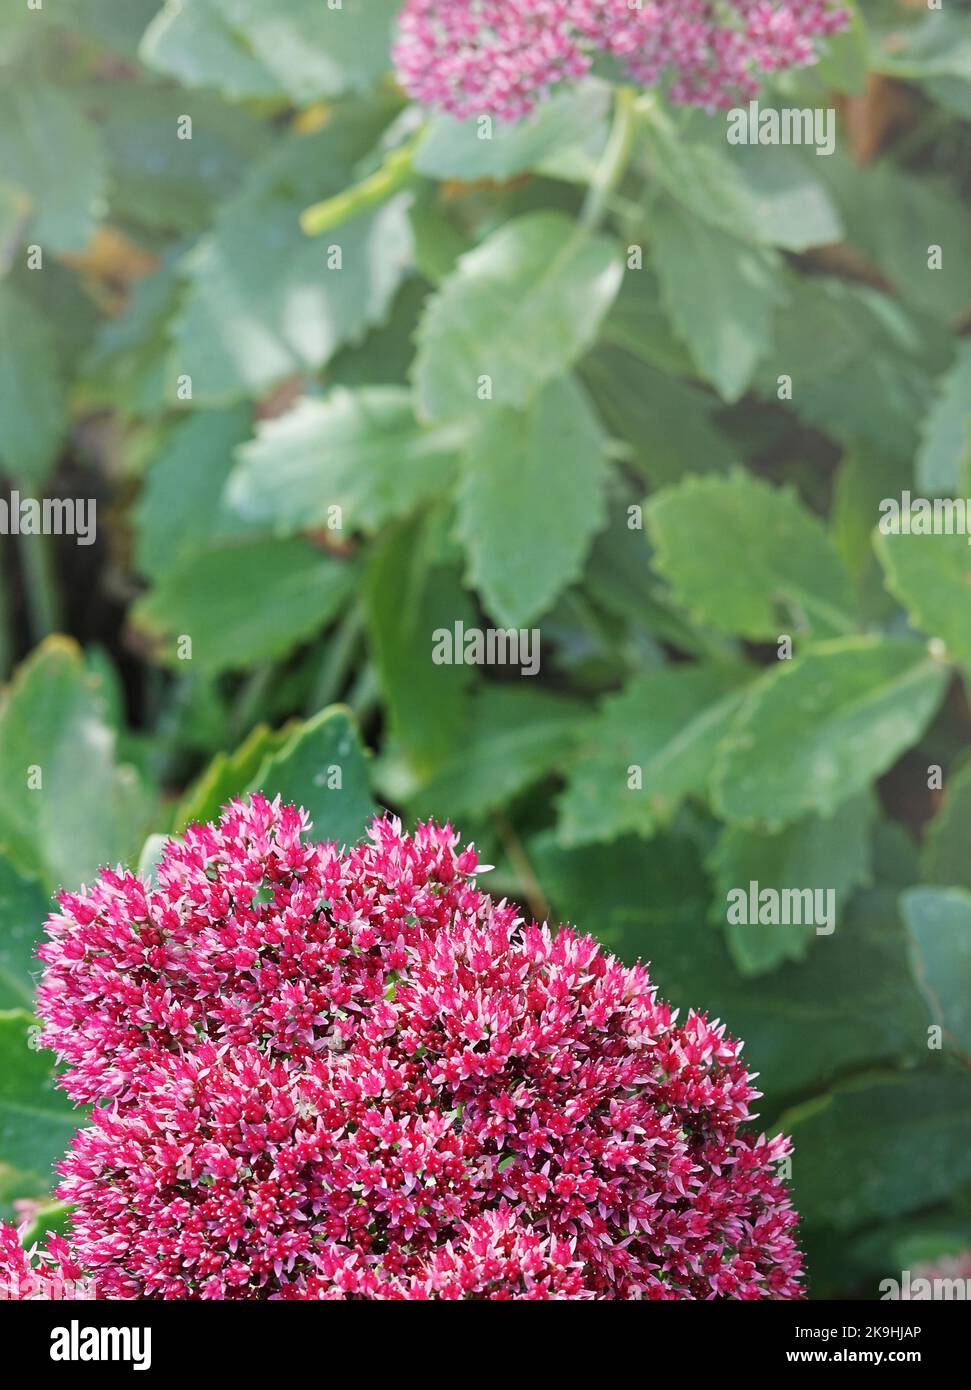 Pink Sedum flower close-up. Macro photography of pink Hylotelephium spectabile on green background. Stock Photo